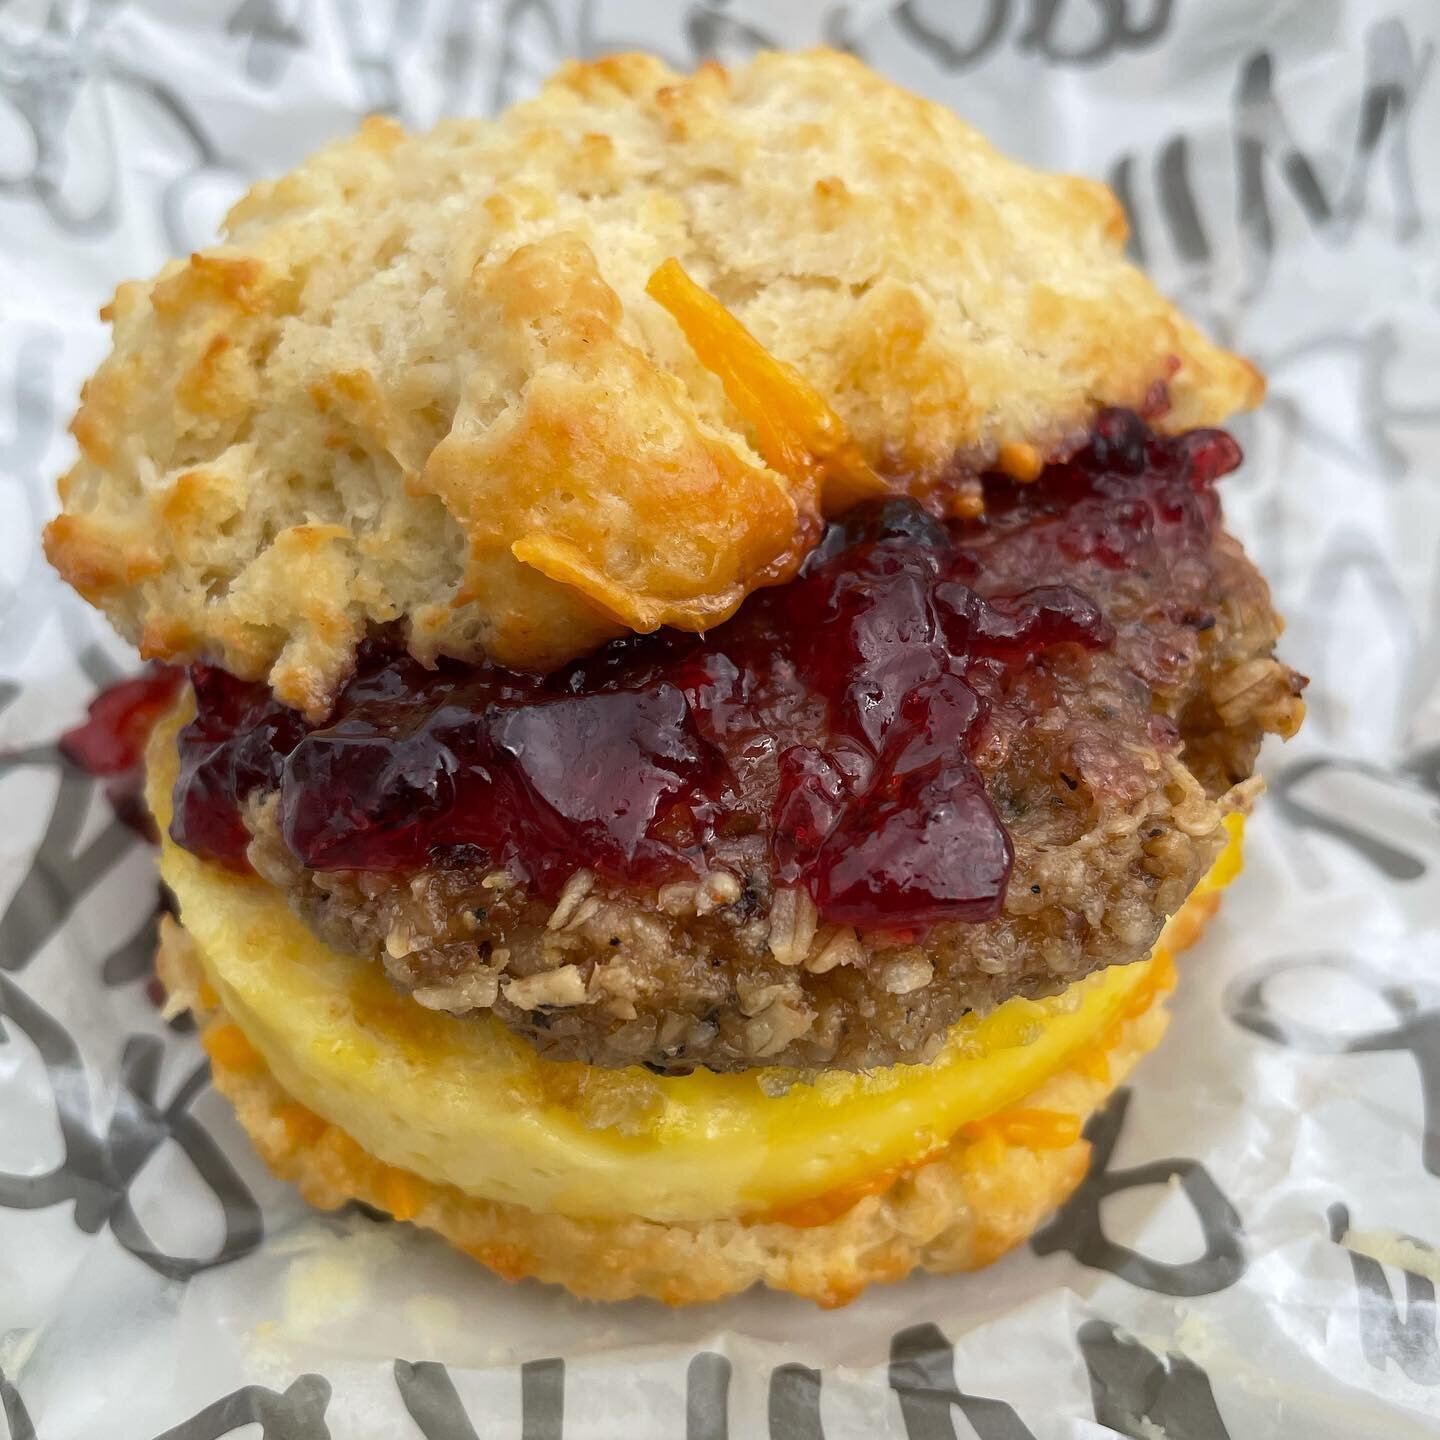 A double biscuit post today because this one from @milkdropbiscuits opens for pre-order tomorrow morning!
If you haven&rsquo;t heard, there is a new biscuit pop-up in town by @buttermilkkitchen. I was able to snag the &ldquo;Not Your Momma&rsquo;s Sa